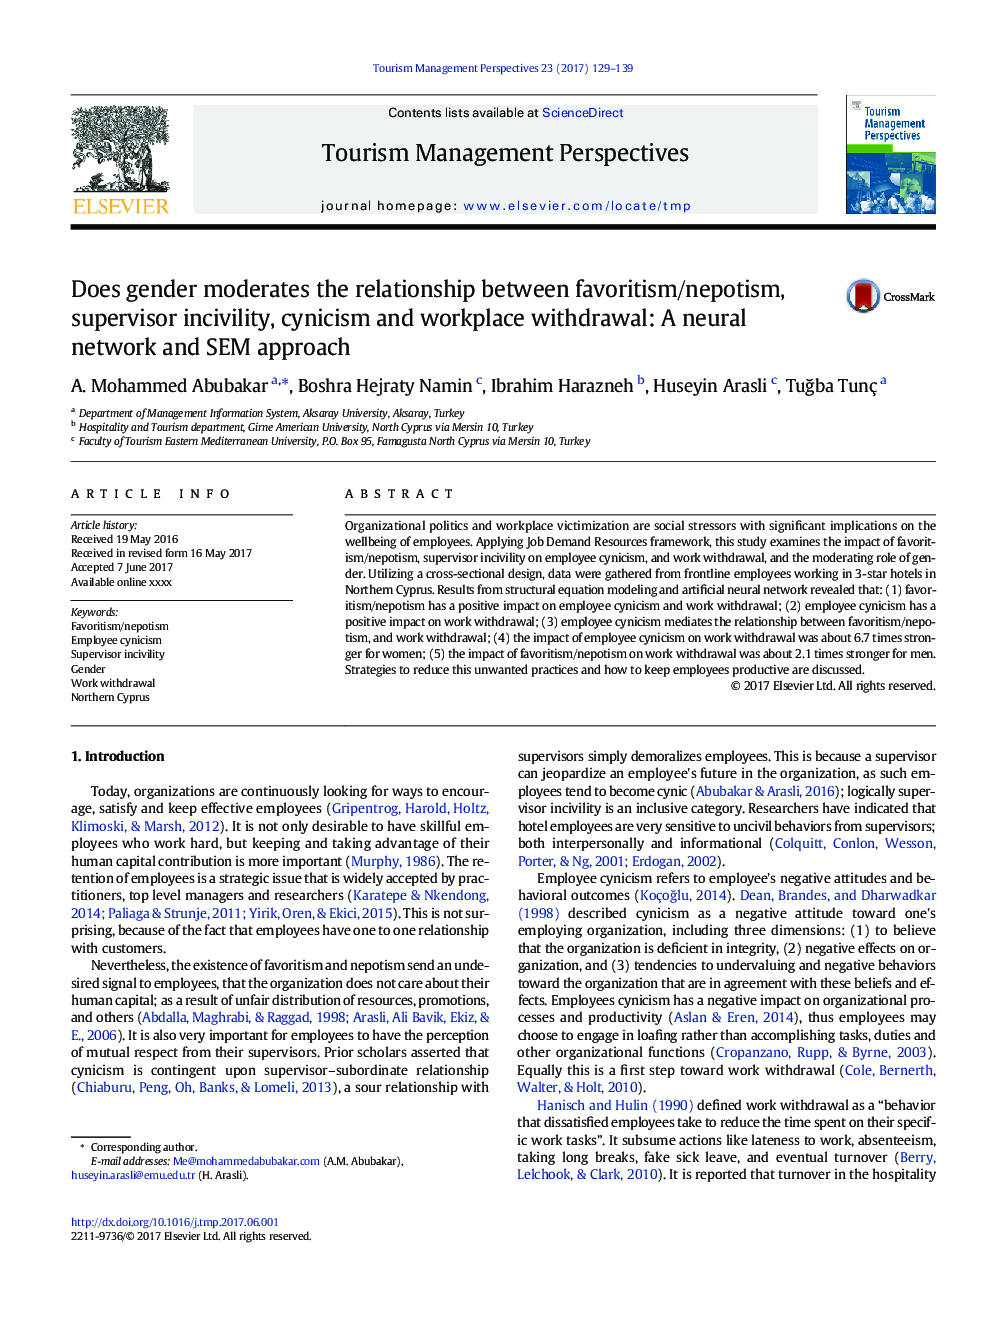 Does gender moderates the relationship between favoritism/nepotism, supervisor incivility, cynicism and workplace withdrawal: A neural network and SEM approach